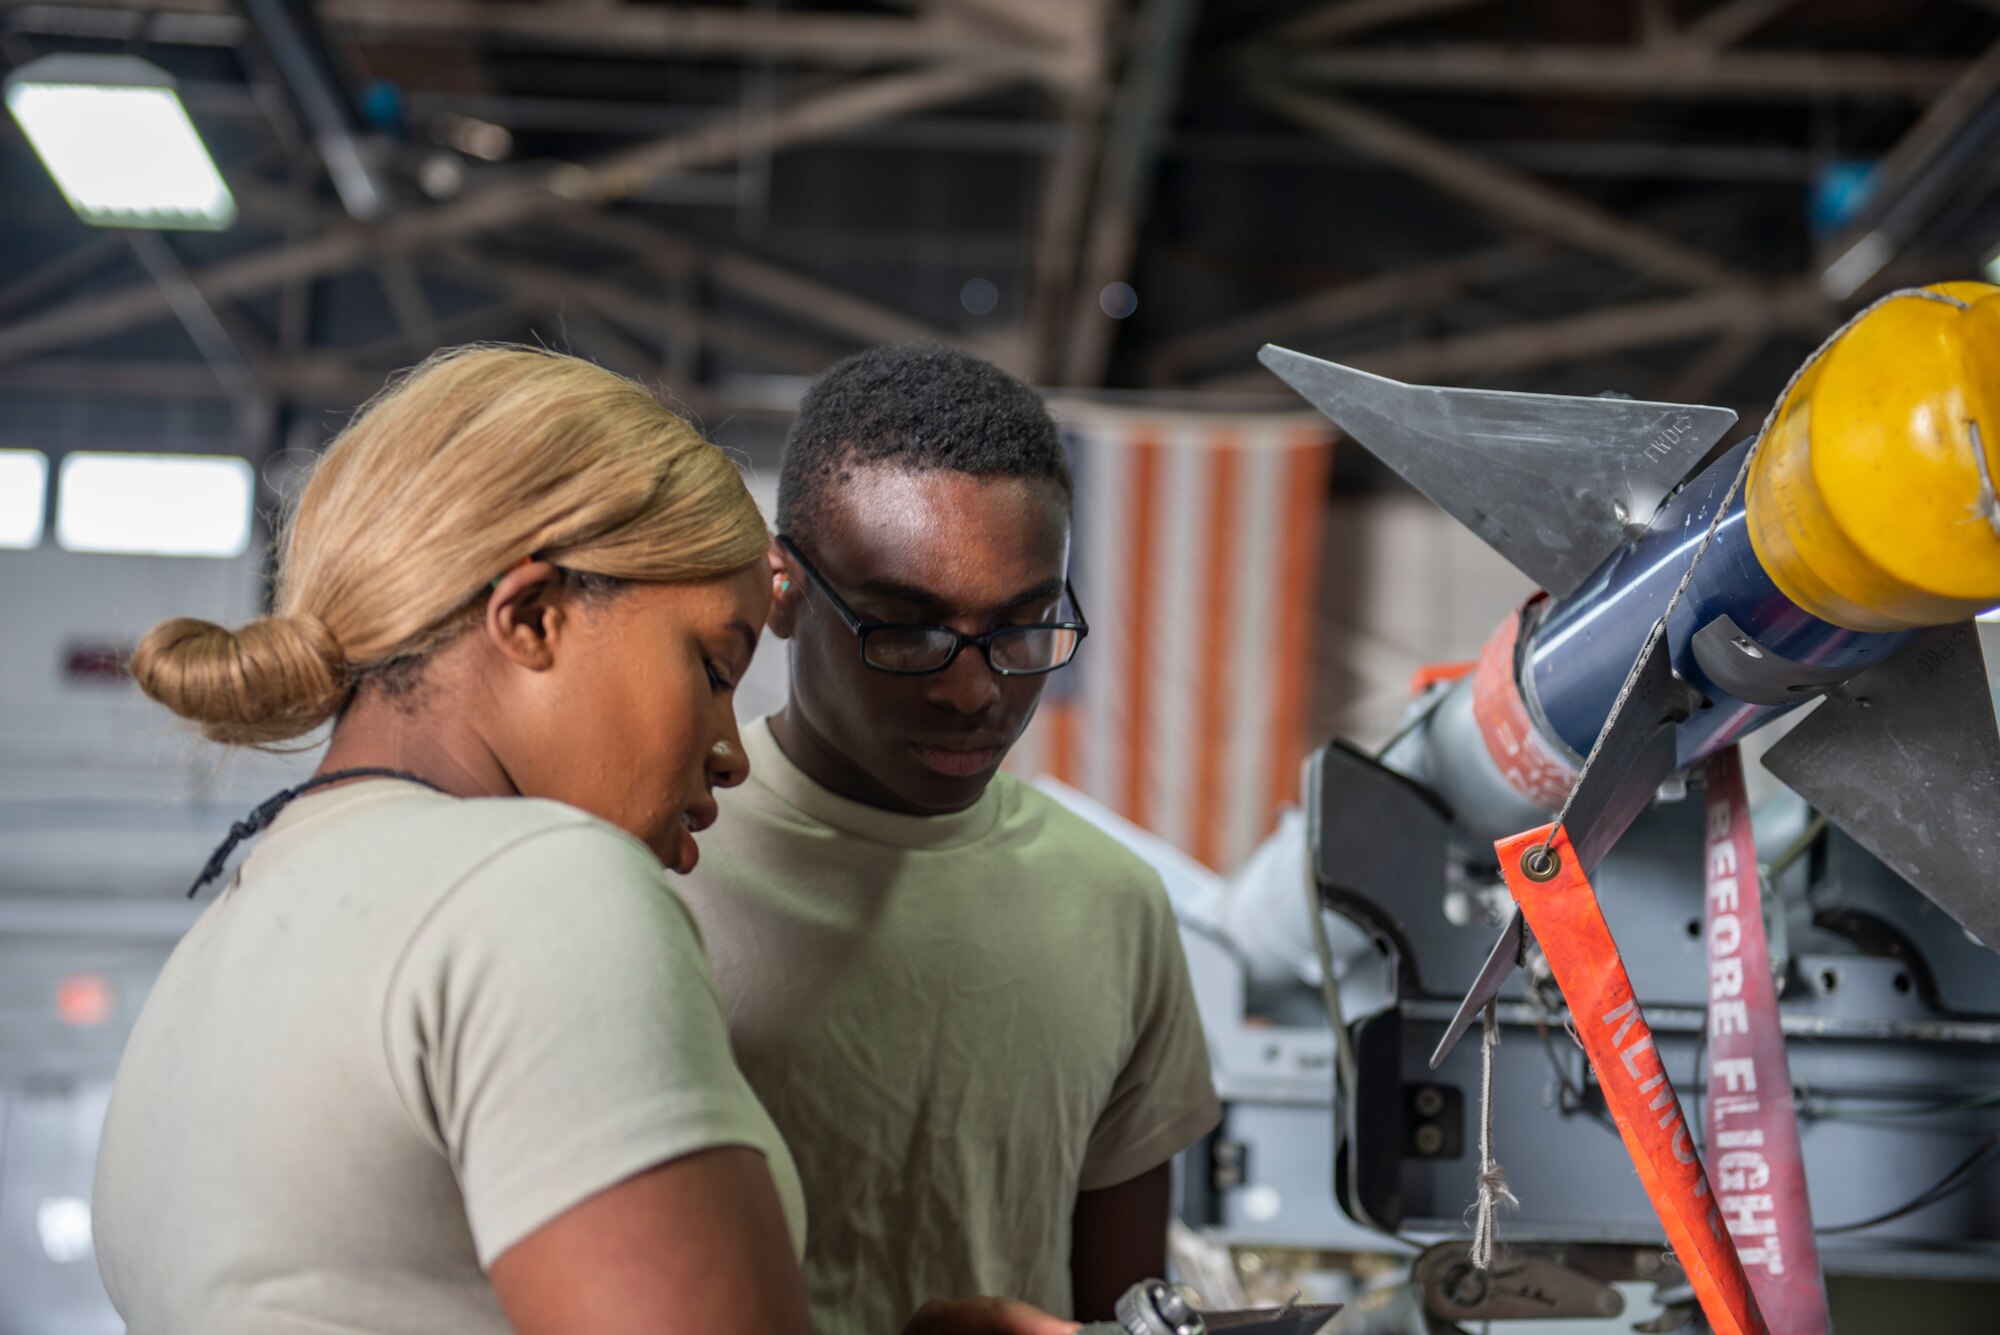 U.S. Air Force Senior Airman Genesa Williams, 20th Maintenance Group Operations weapons standardization load crew member team lead, trains a new Airman on how to attach a missile during Women’s History Month at Shaw Air Force Base, S.C., March 8, 2019.